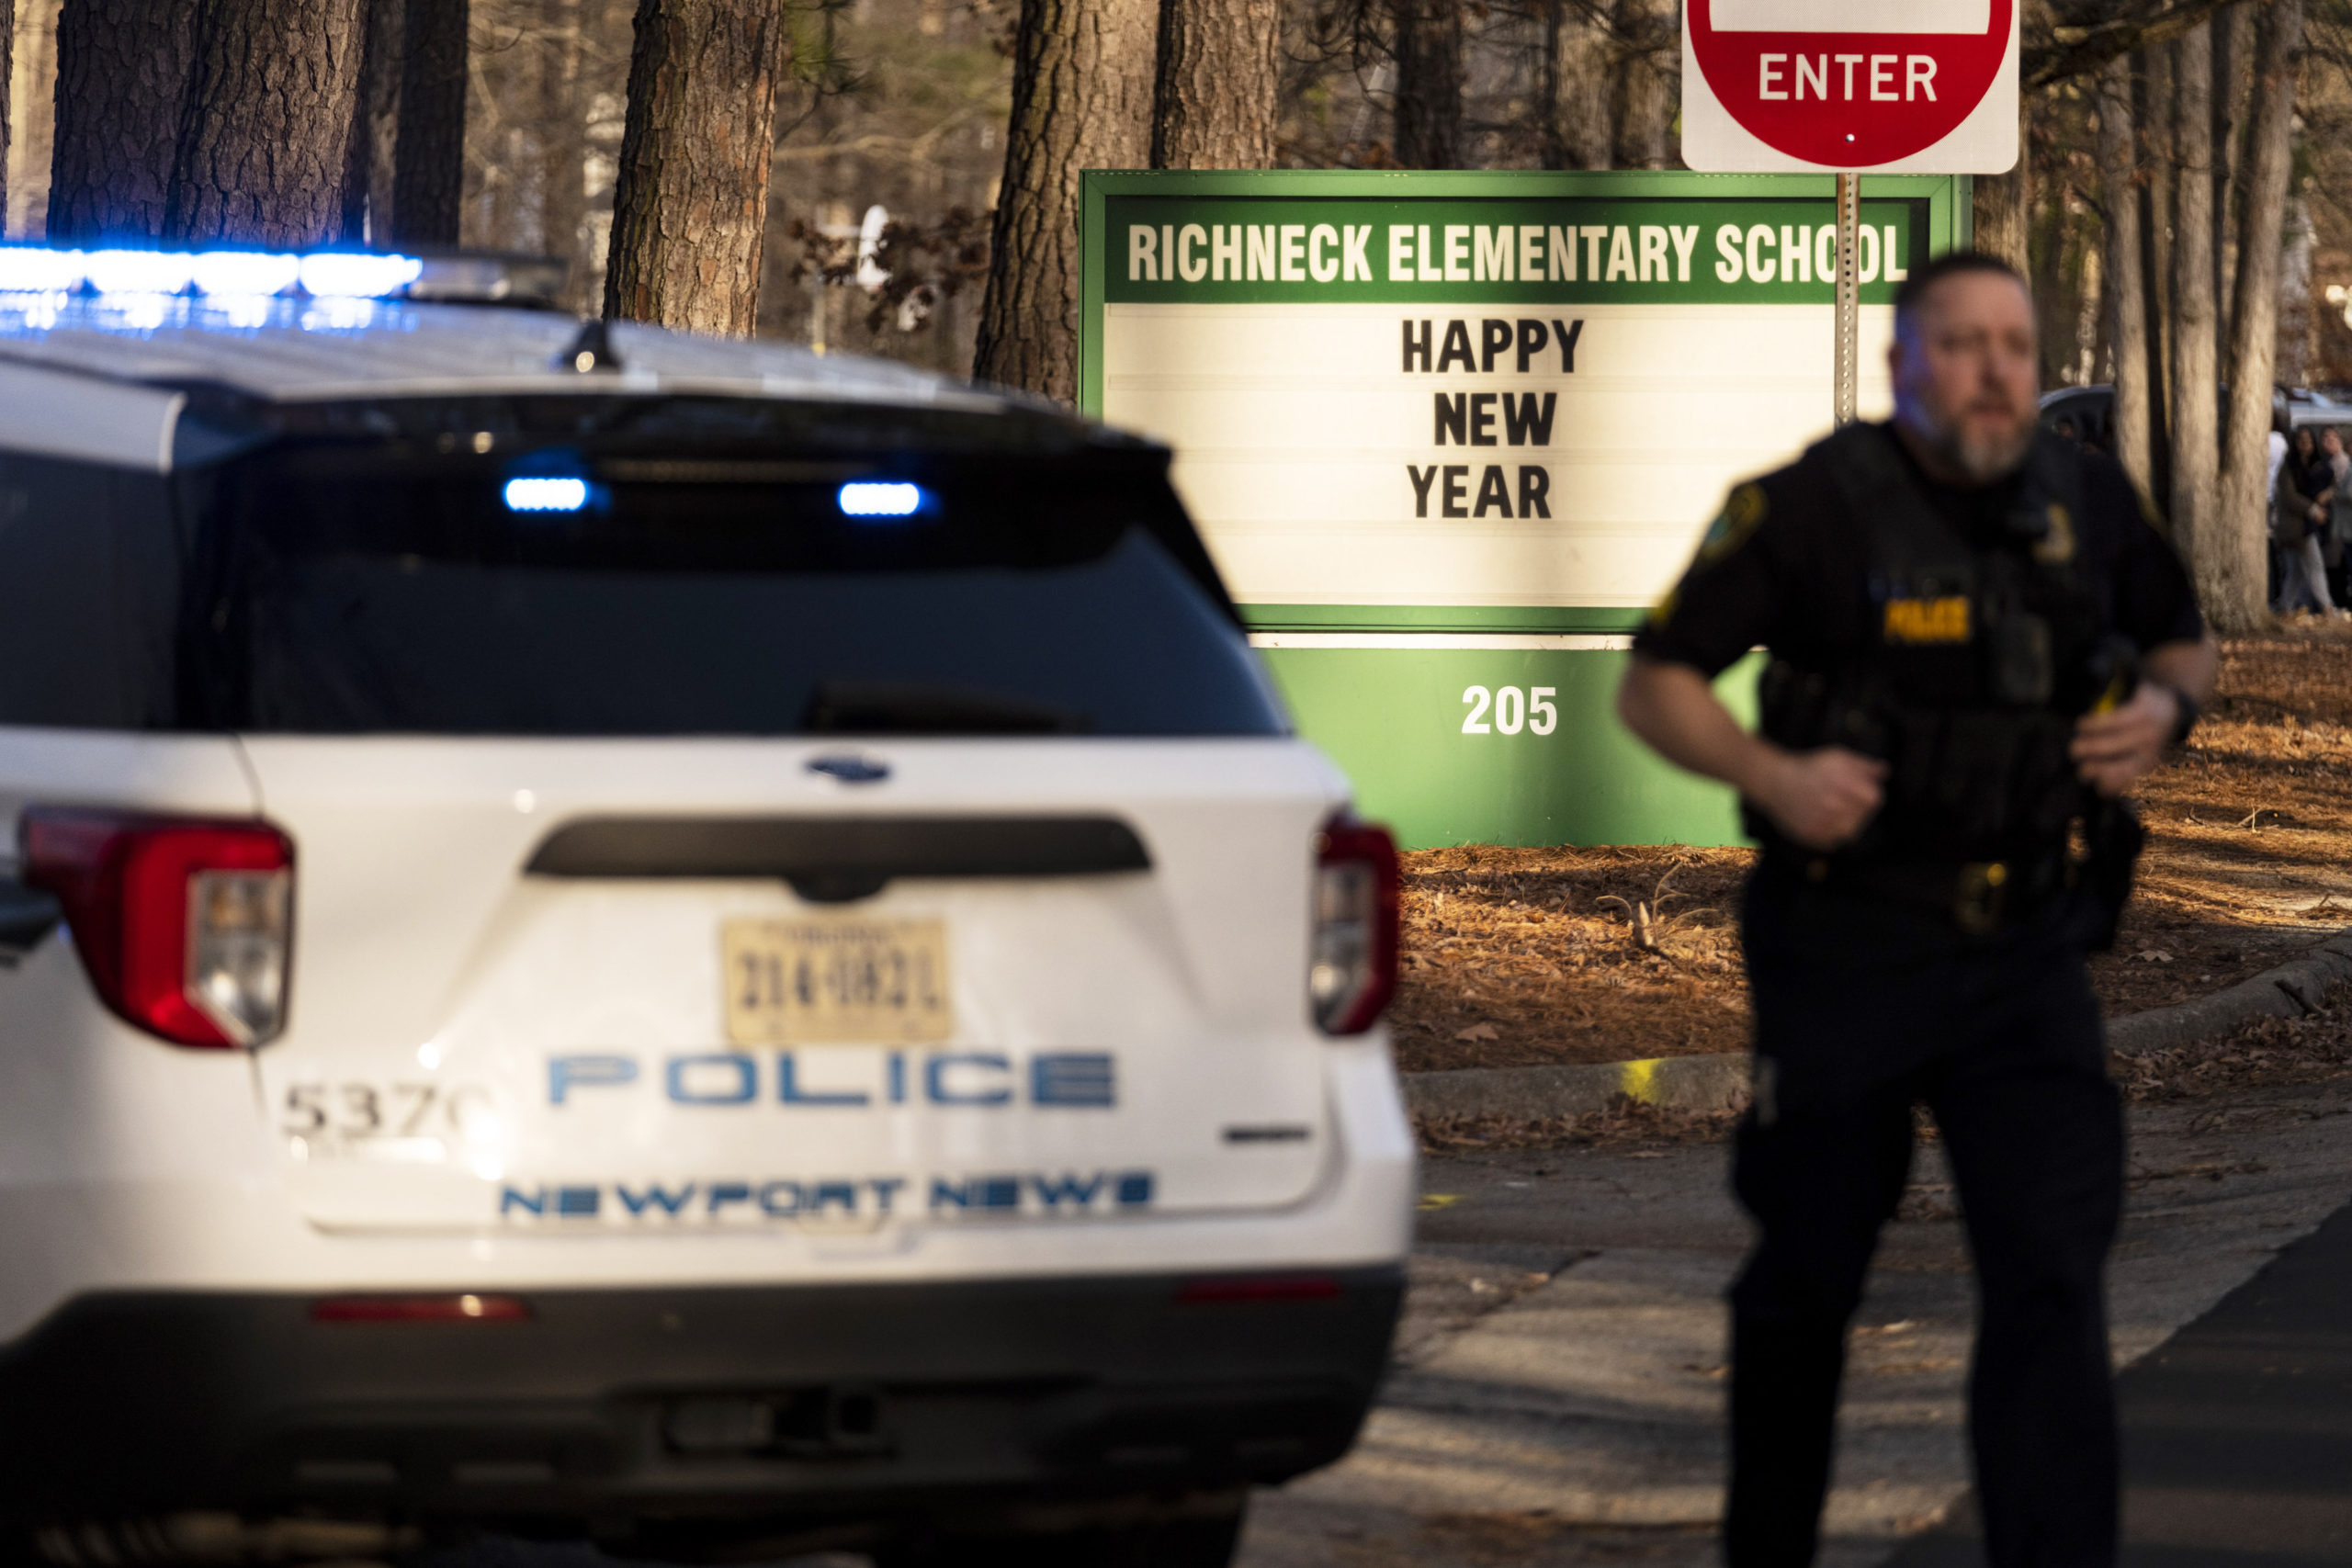 Police respond to a shooting at Richneck Elementary School in Newport News, Virginia, on Friday.